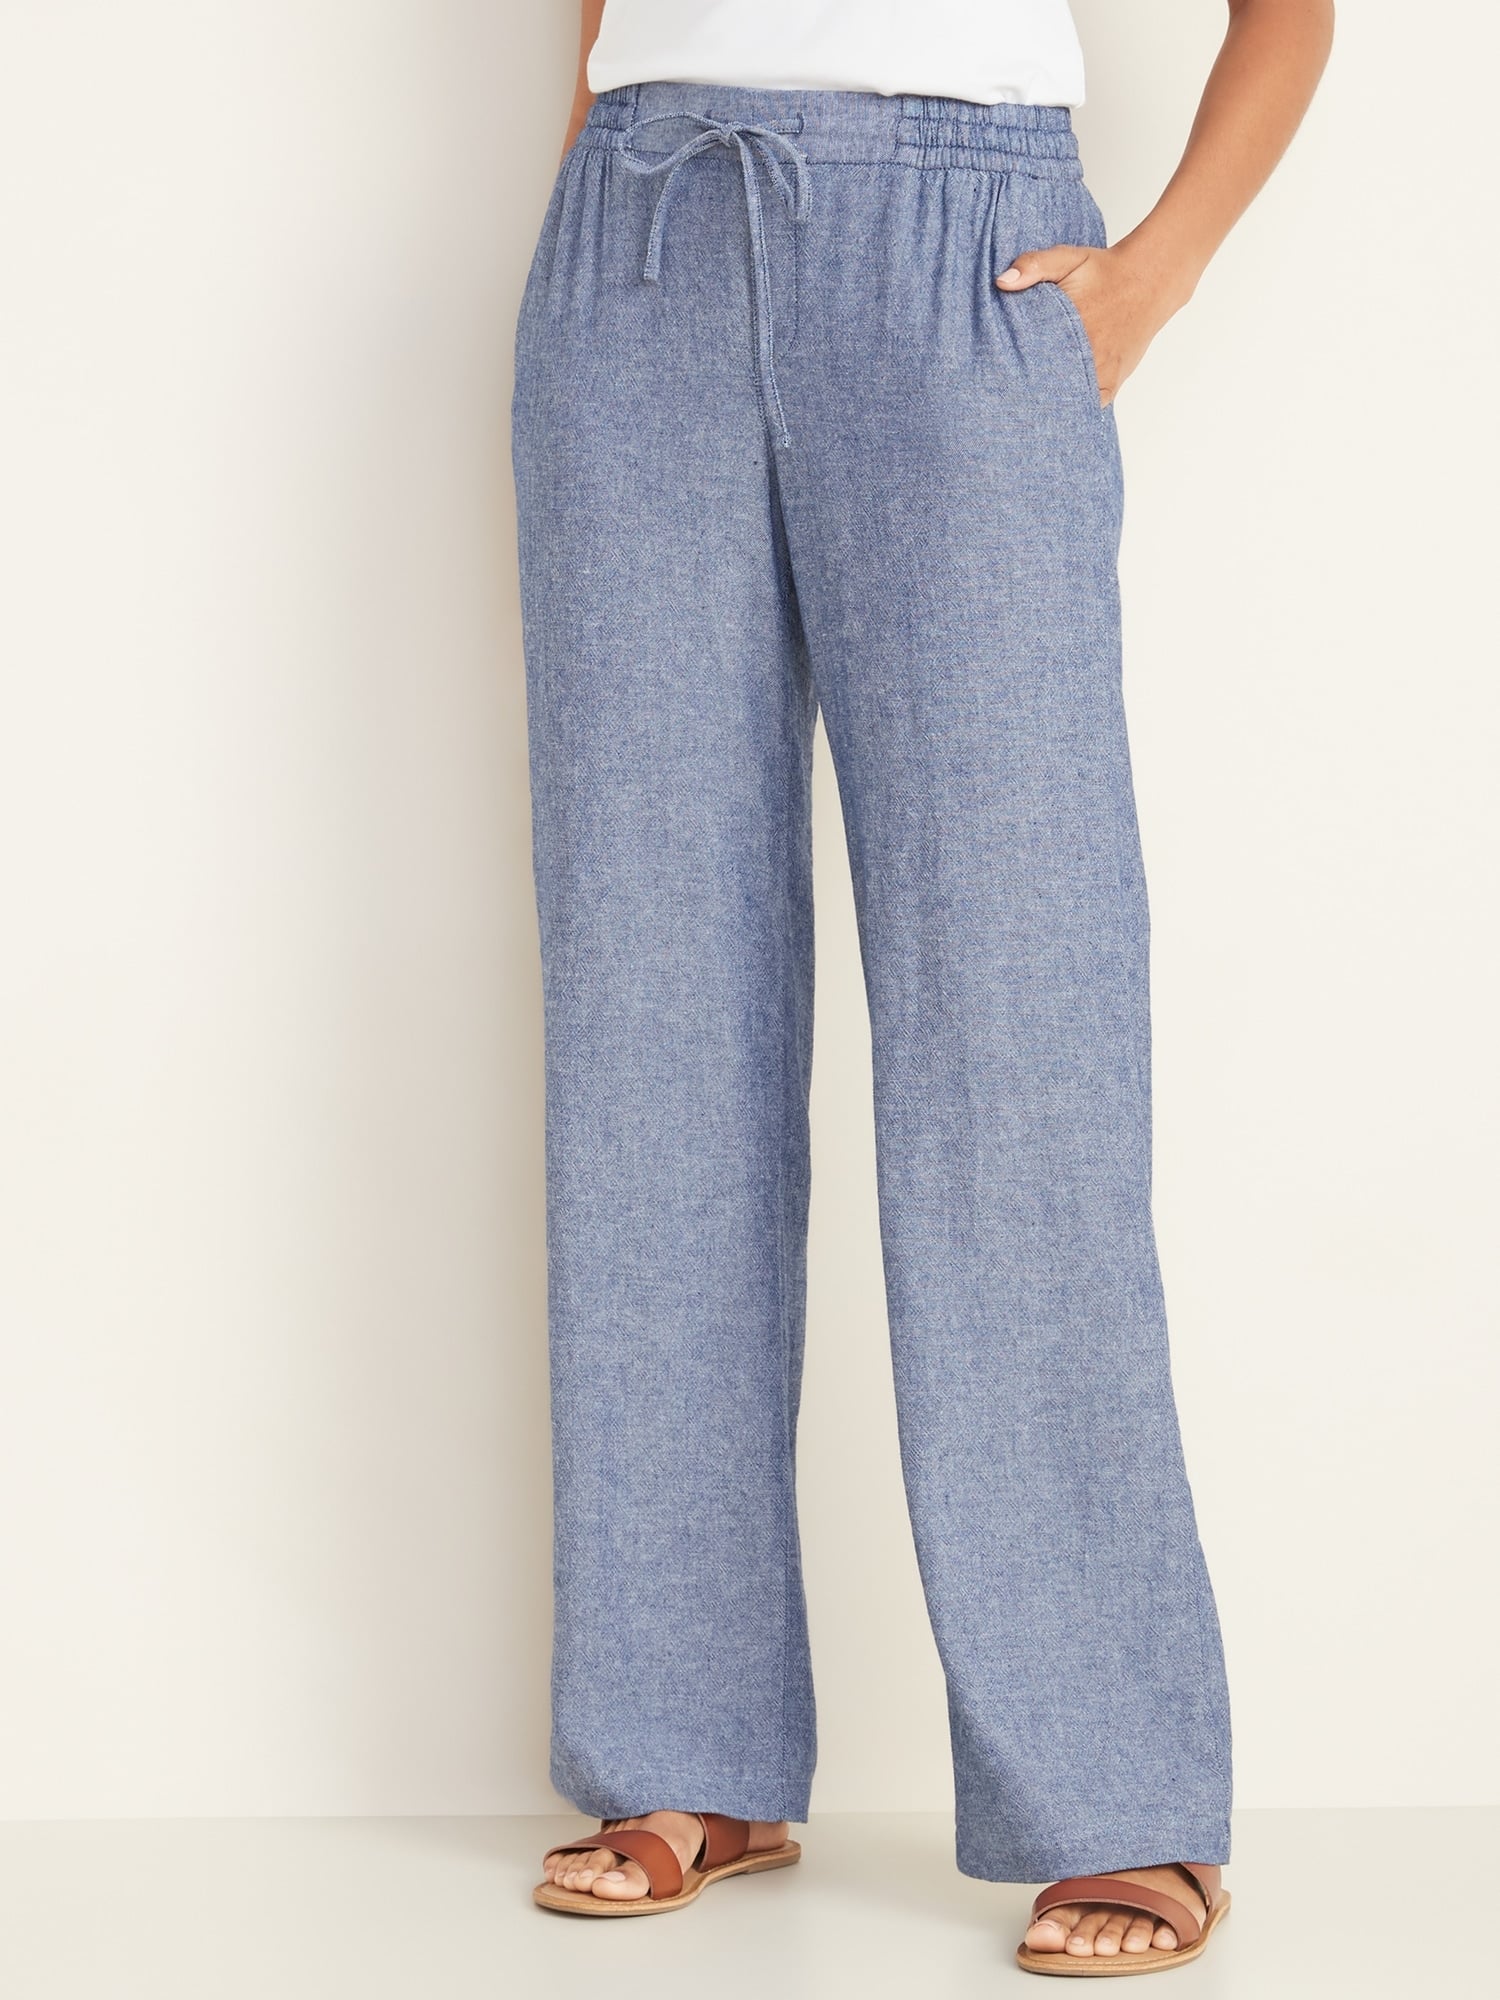 Most Comfortable Travel Pants From Old Navy